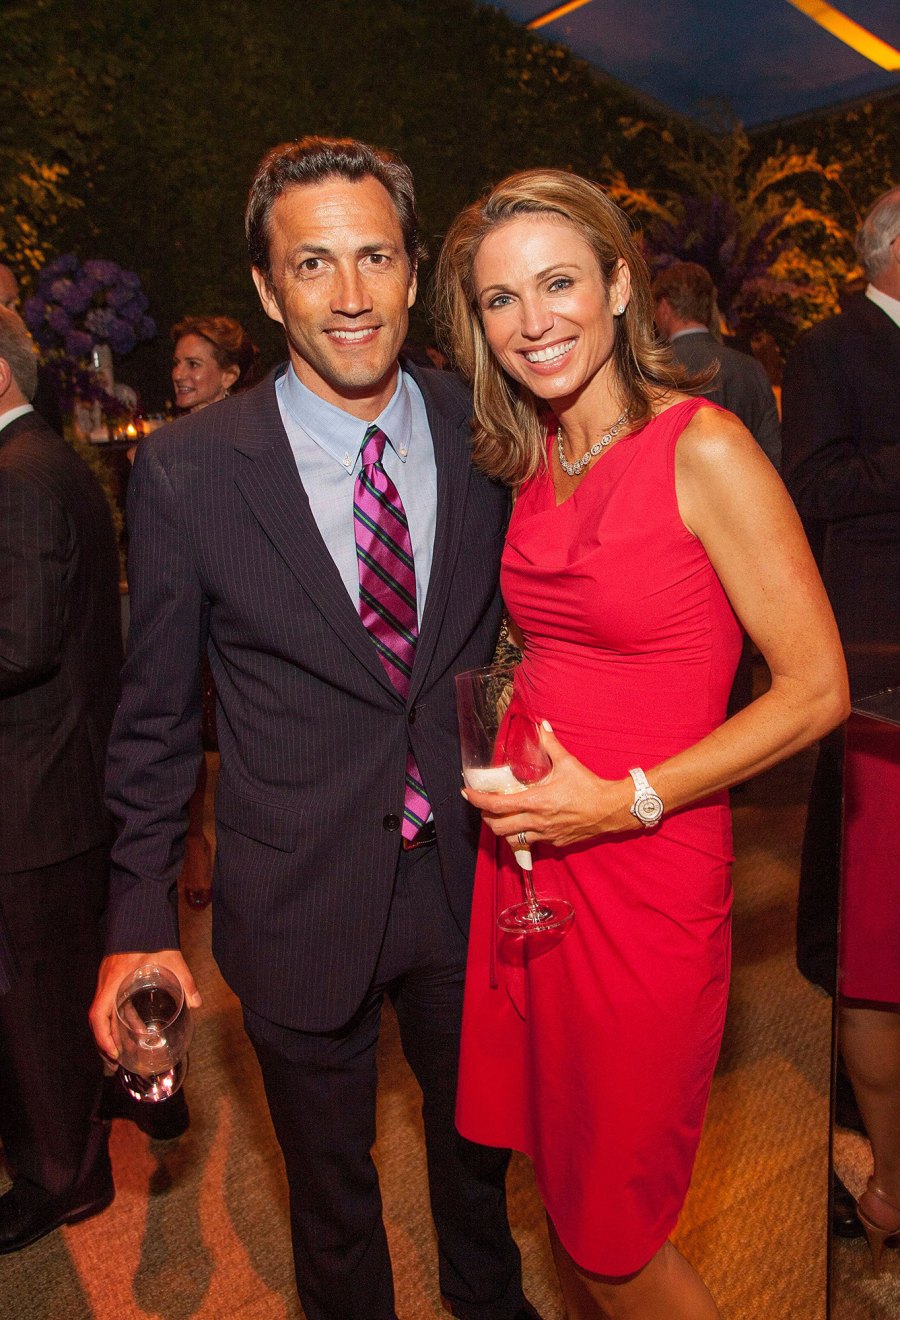 Amy Robach and Andrew Shue's Relationship Timeline George Lucas and Mellody Hobson's Wedding Reception, Chicago, USA - 29 Jun 2013